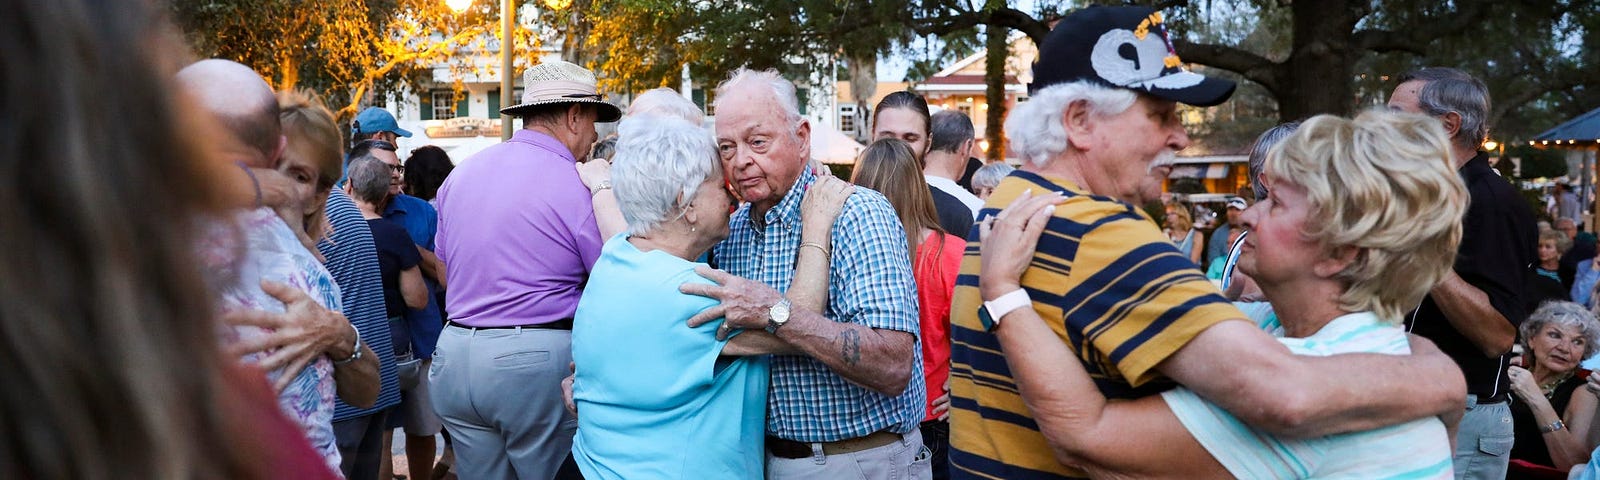 Betty Pochinski, 77 and Ed Wilson, 83 dance as band plays in Lake Sumter Landing Market Square in The Villages, Florida on March 11, 2020.